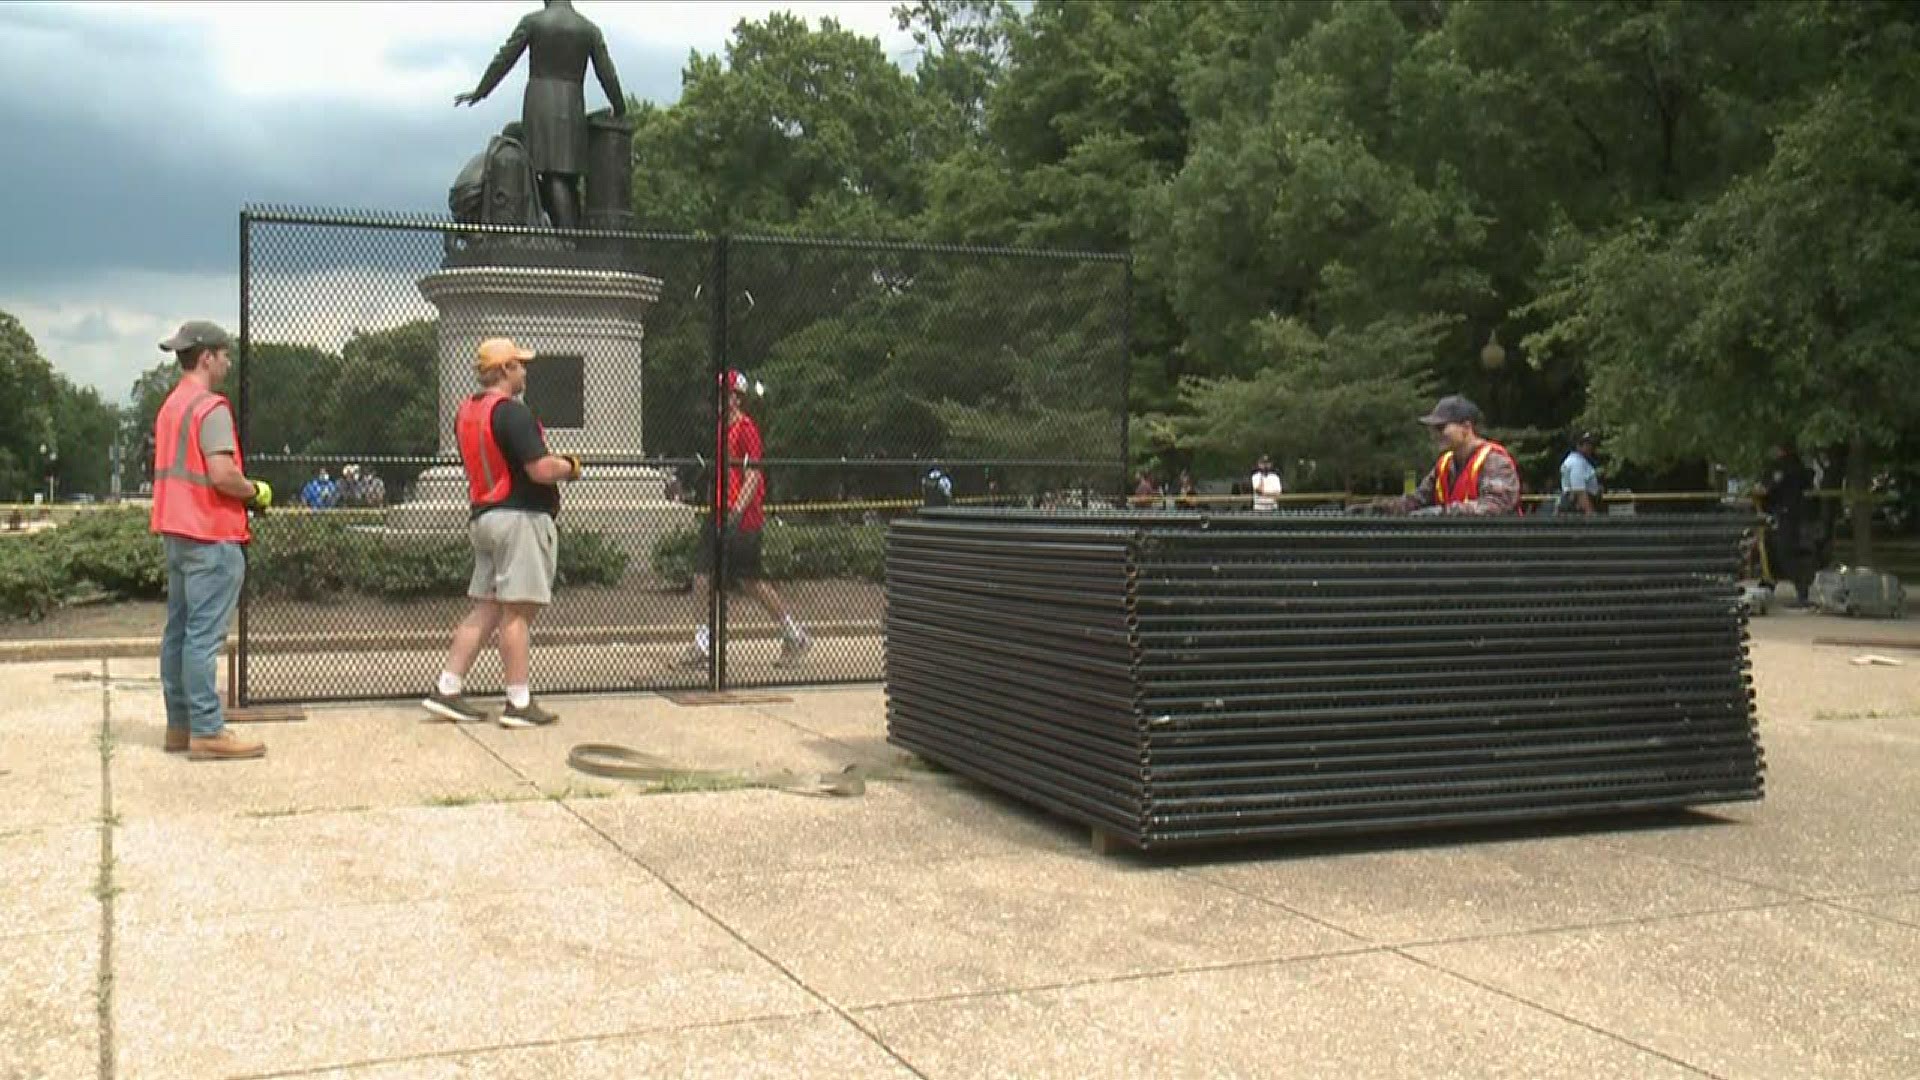 Fencing is being put up around the Emancipation Memorial in Lincoln Park in anticipation of a protest that has threatened to tear down the statue.